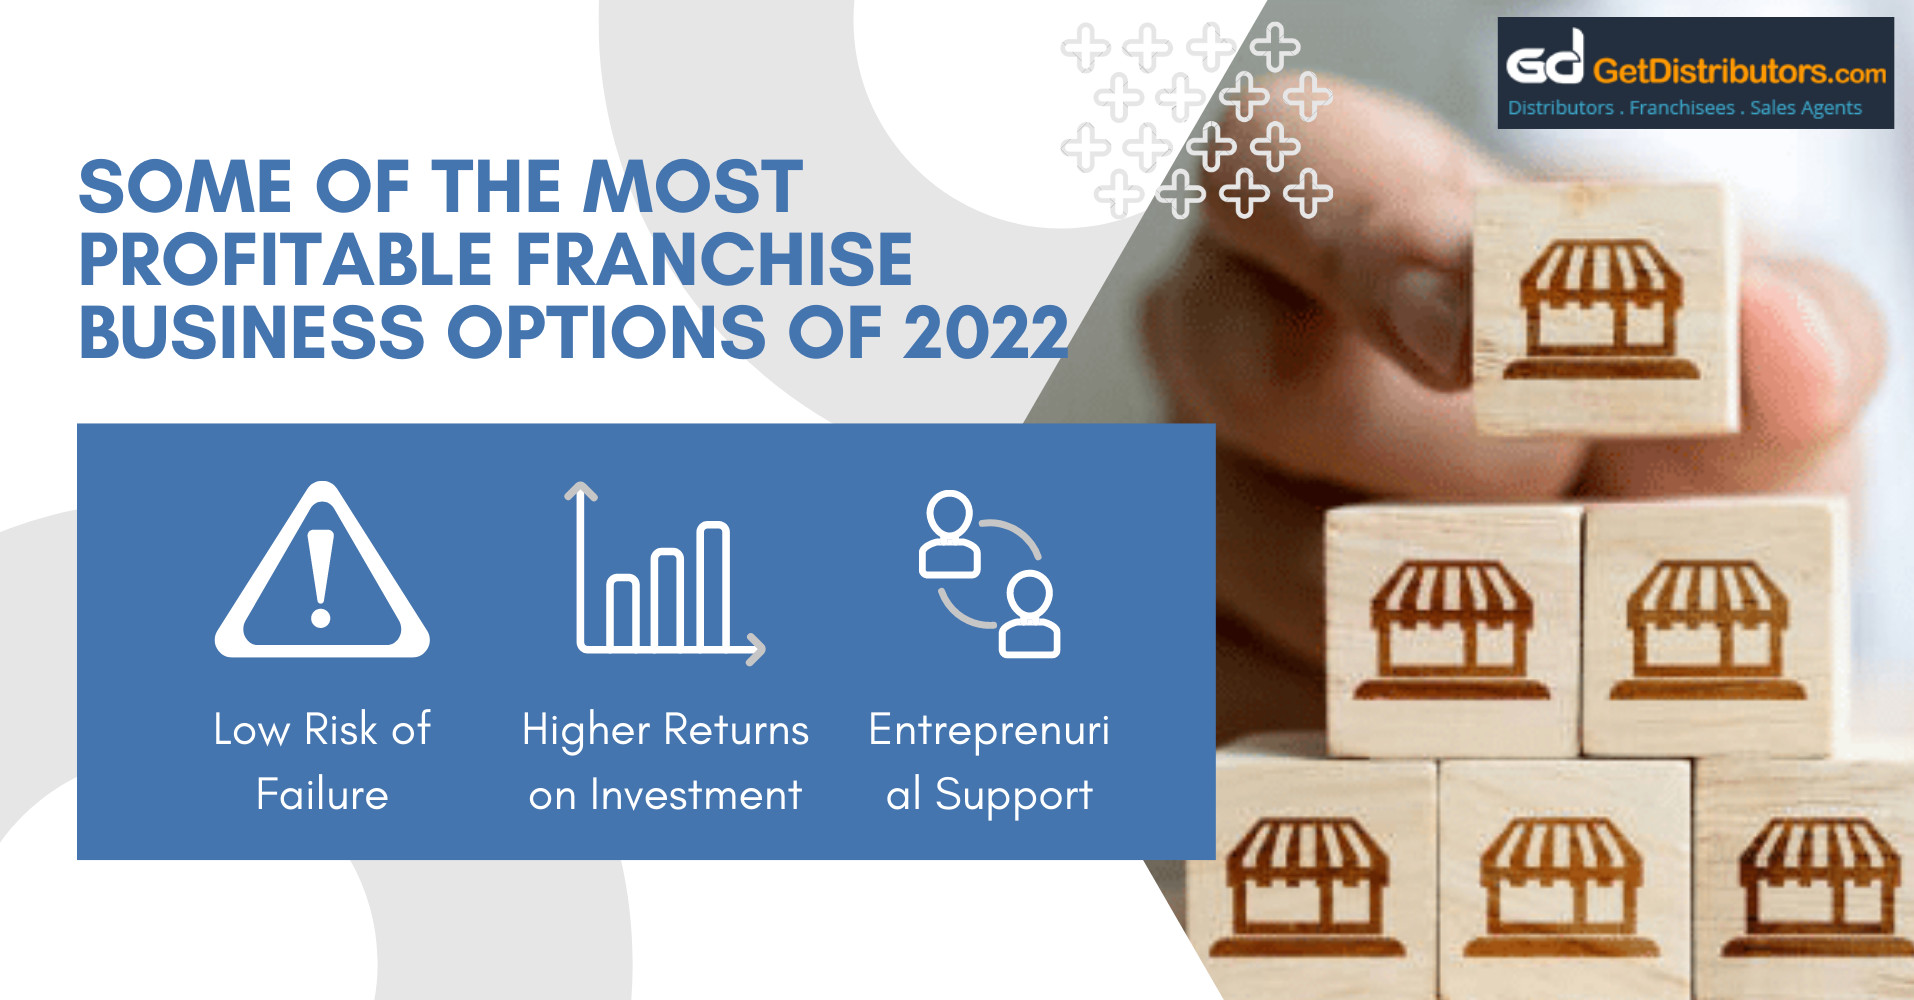 Some of the most profitable franchise business options of 2022